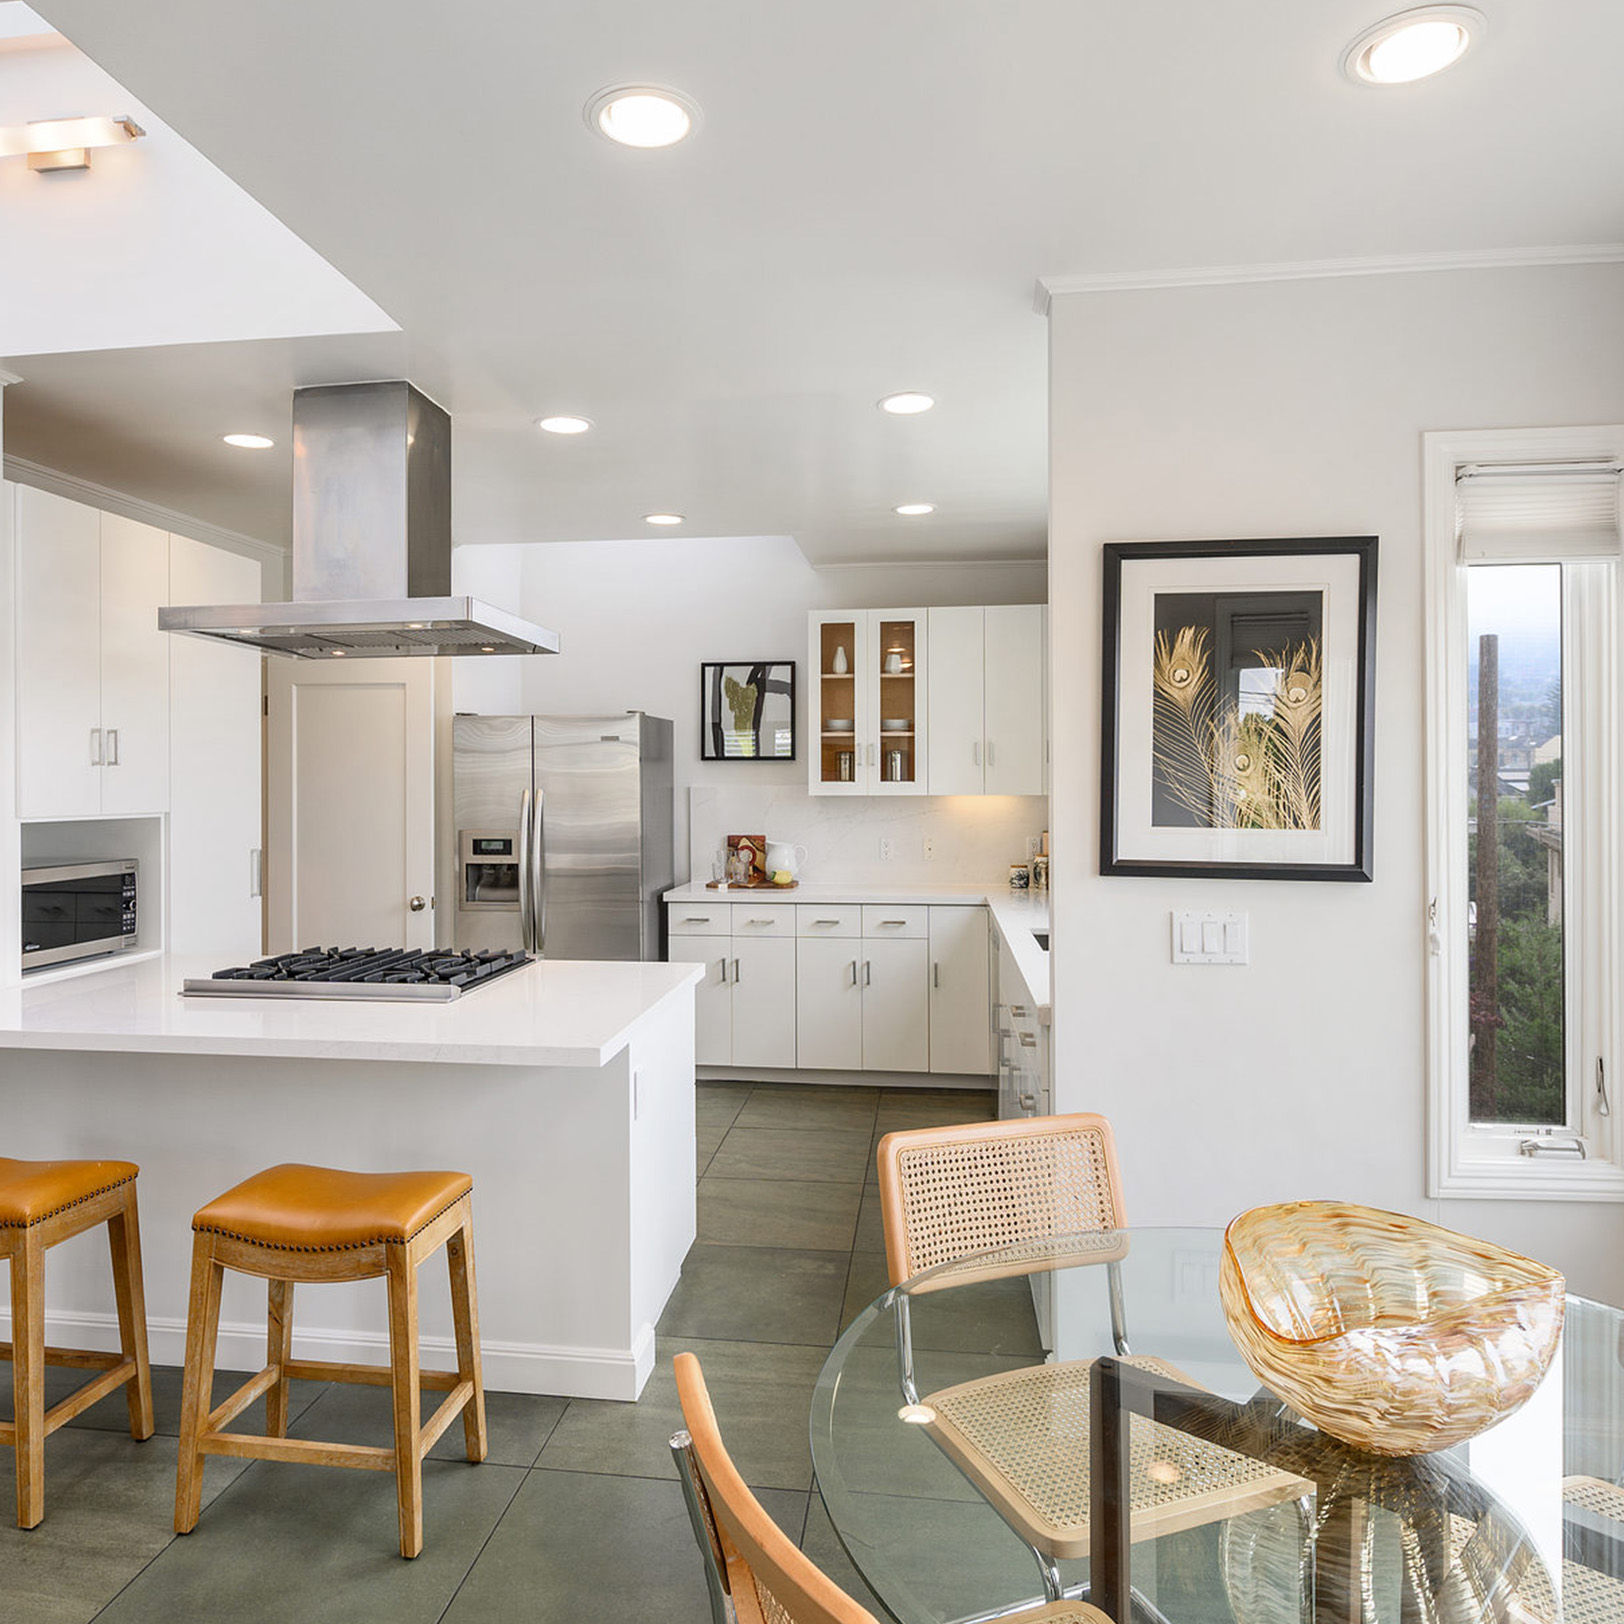 View of the kitchen at 2566 14th Ave, featuring white cabinets